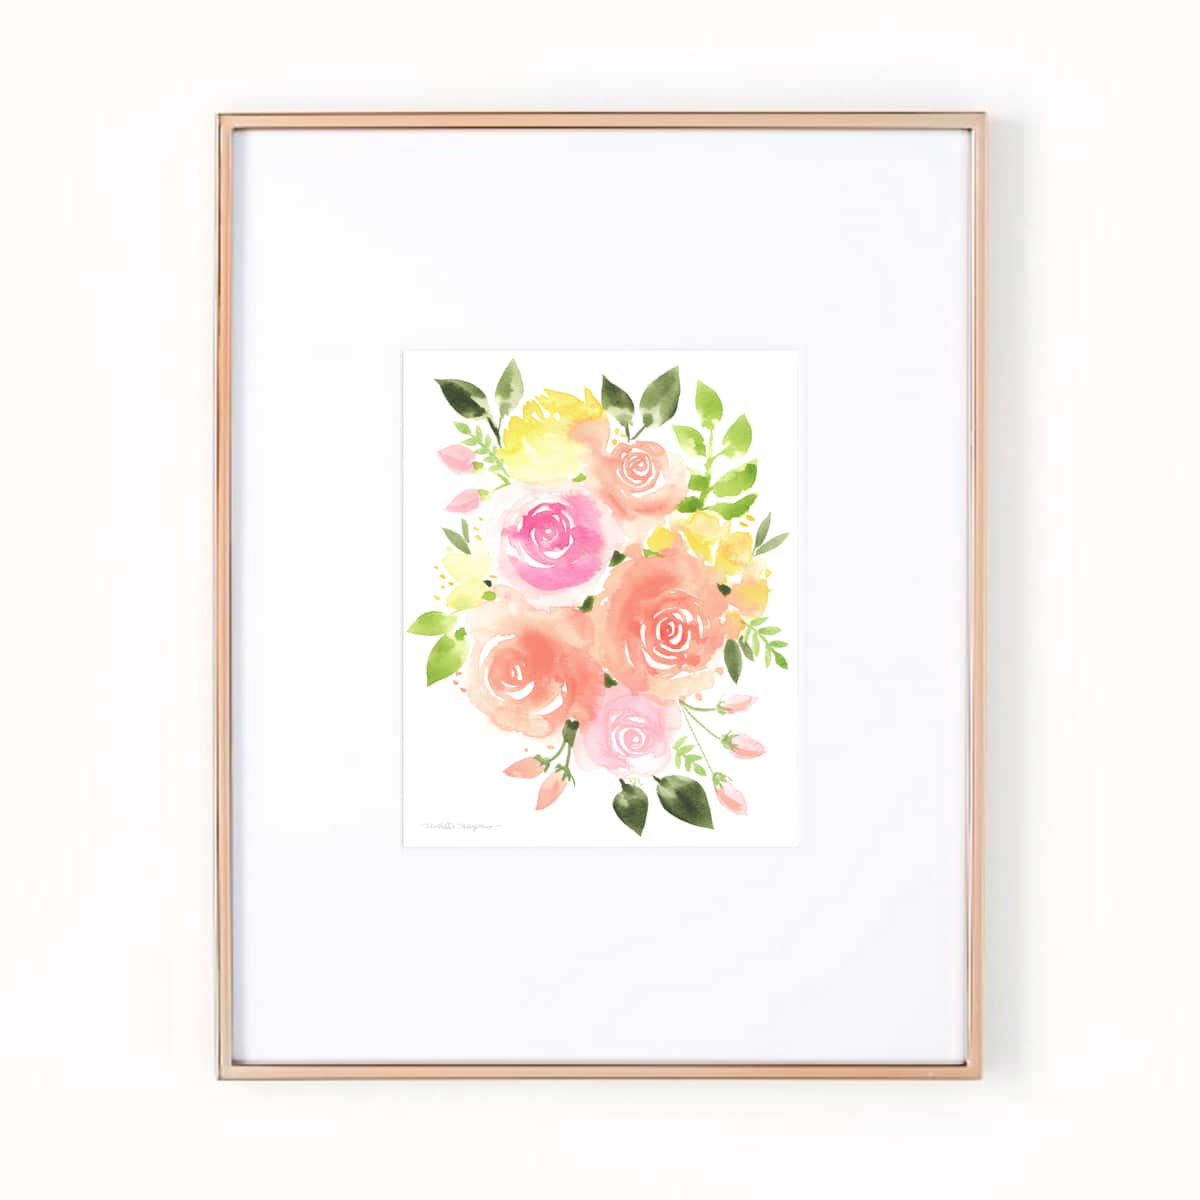 Peach, yellow and pink botanical abstract floral watercolor painting art print by artist Michelle Mospens. | Mospens Studio